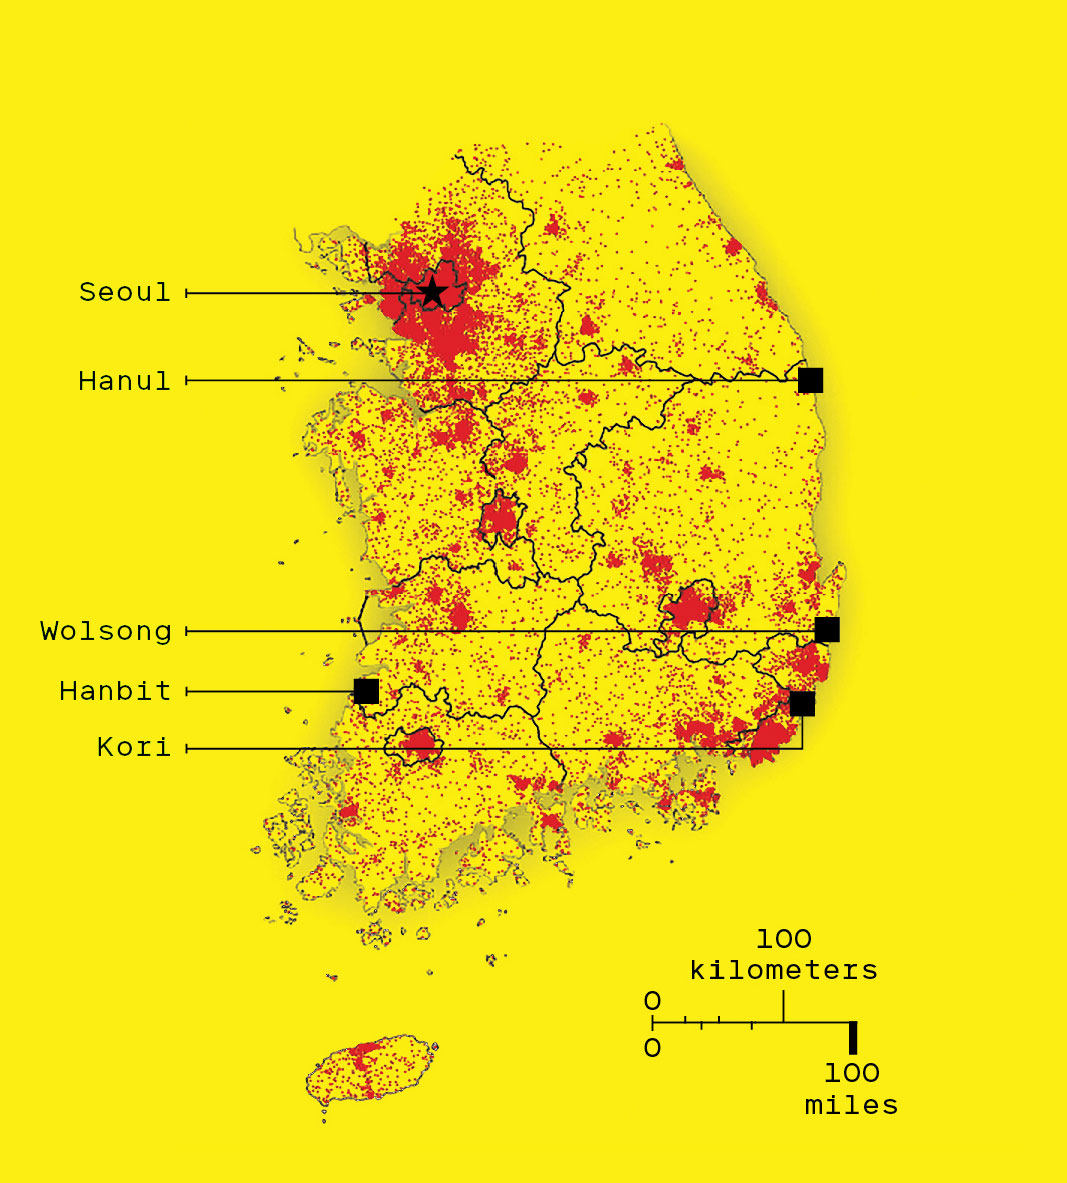 Most of South Korea's nuclear reactors are clustered in its densely populated southeast.